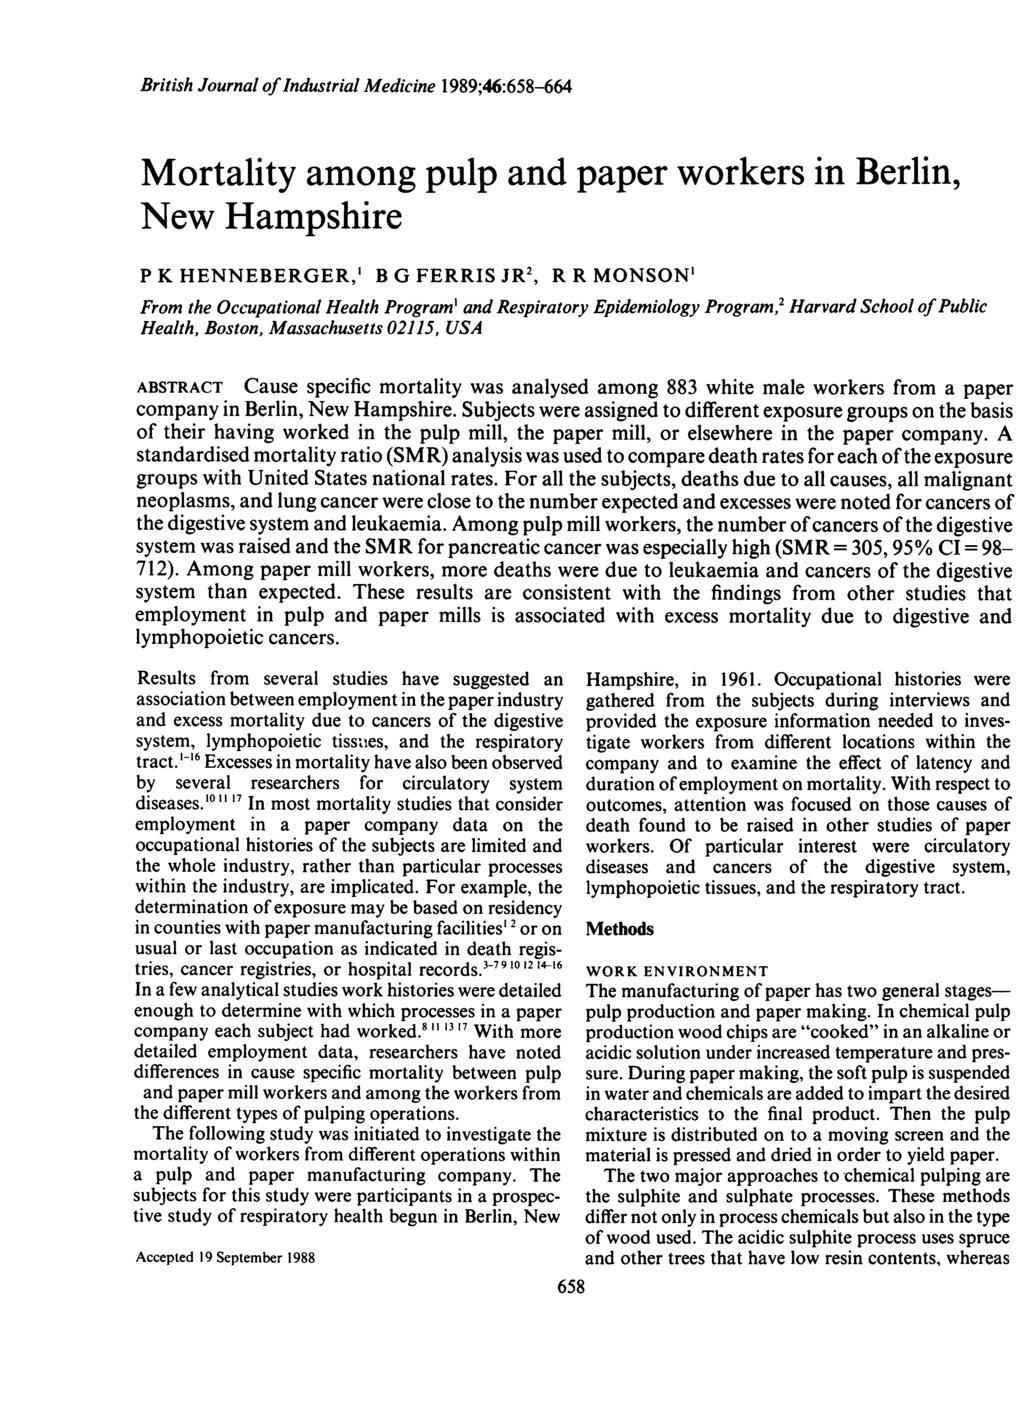 British Journal ofindustrial Medicine 1989;46:658-664 Mortality among pulp and paper workers in Berlin, New Hampshire P K HENNEBERGER,' B G FERRIS JR2, R R MONSON' From the Occupational Health